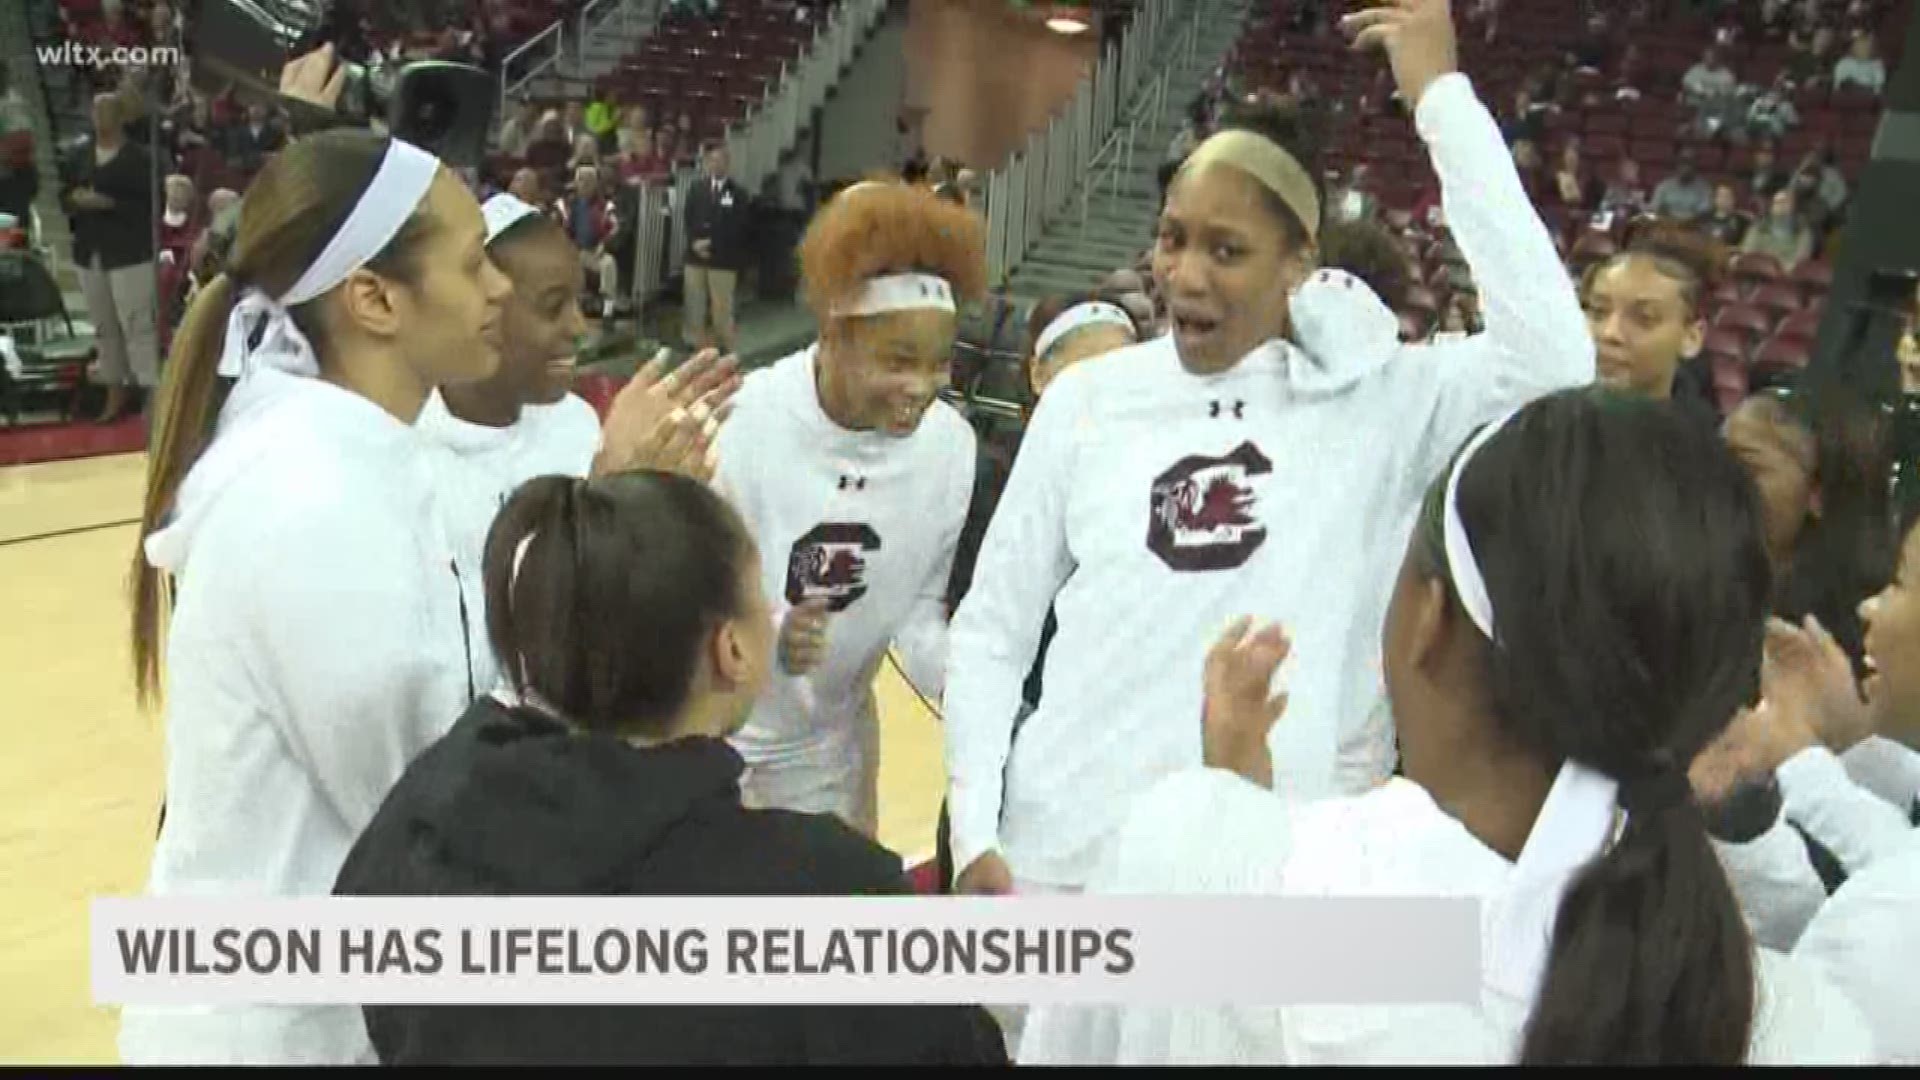 On a day when she picks up another national award, A'ja Wilson is expected to be the first pick in the WNBA Draft. She took a few minutes to talk to News19 about things off the court like being under a microscope and having lifelong friendships.